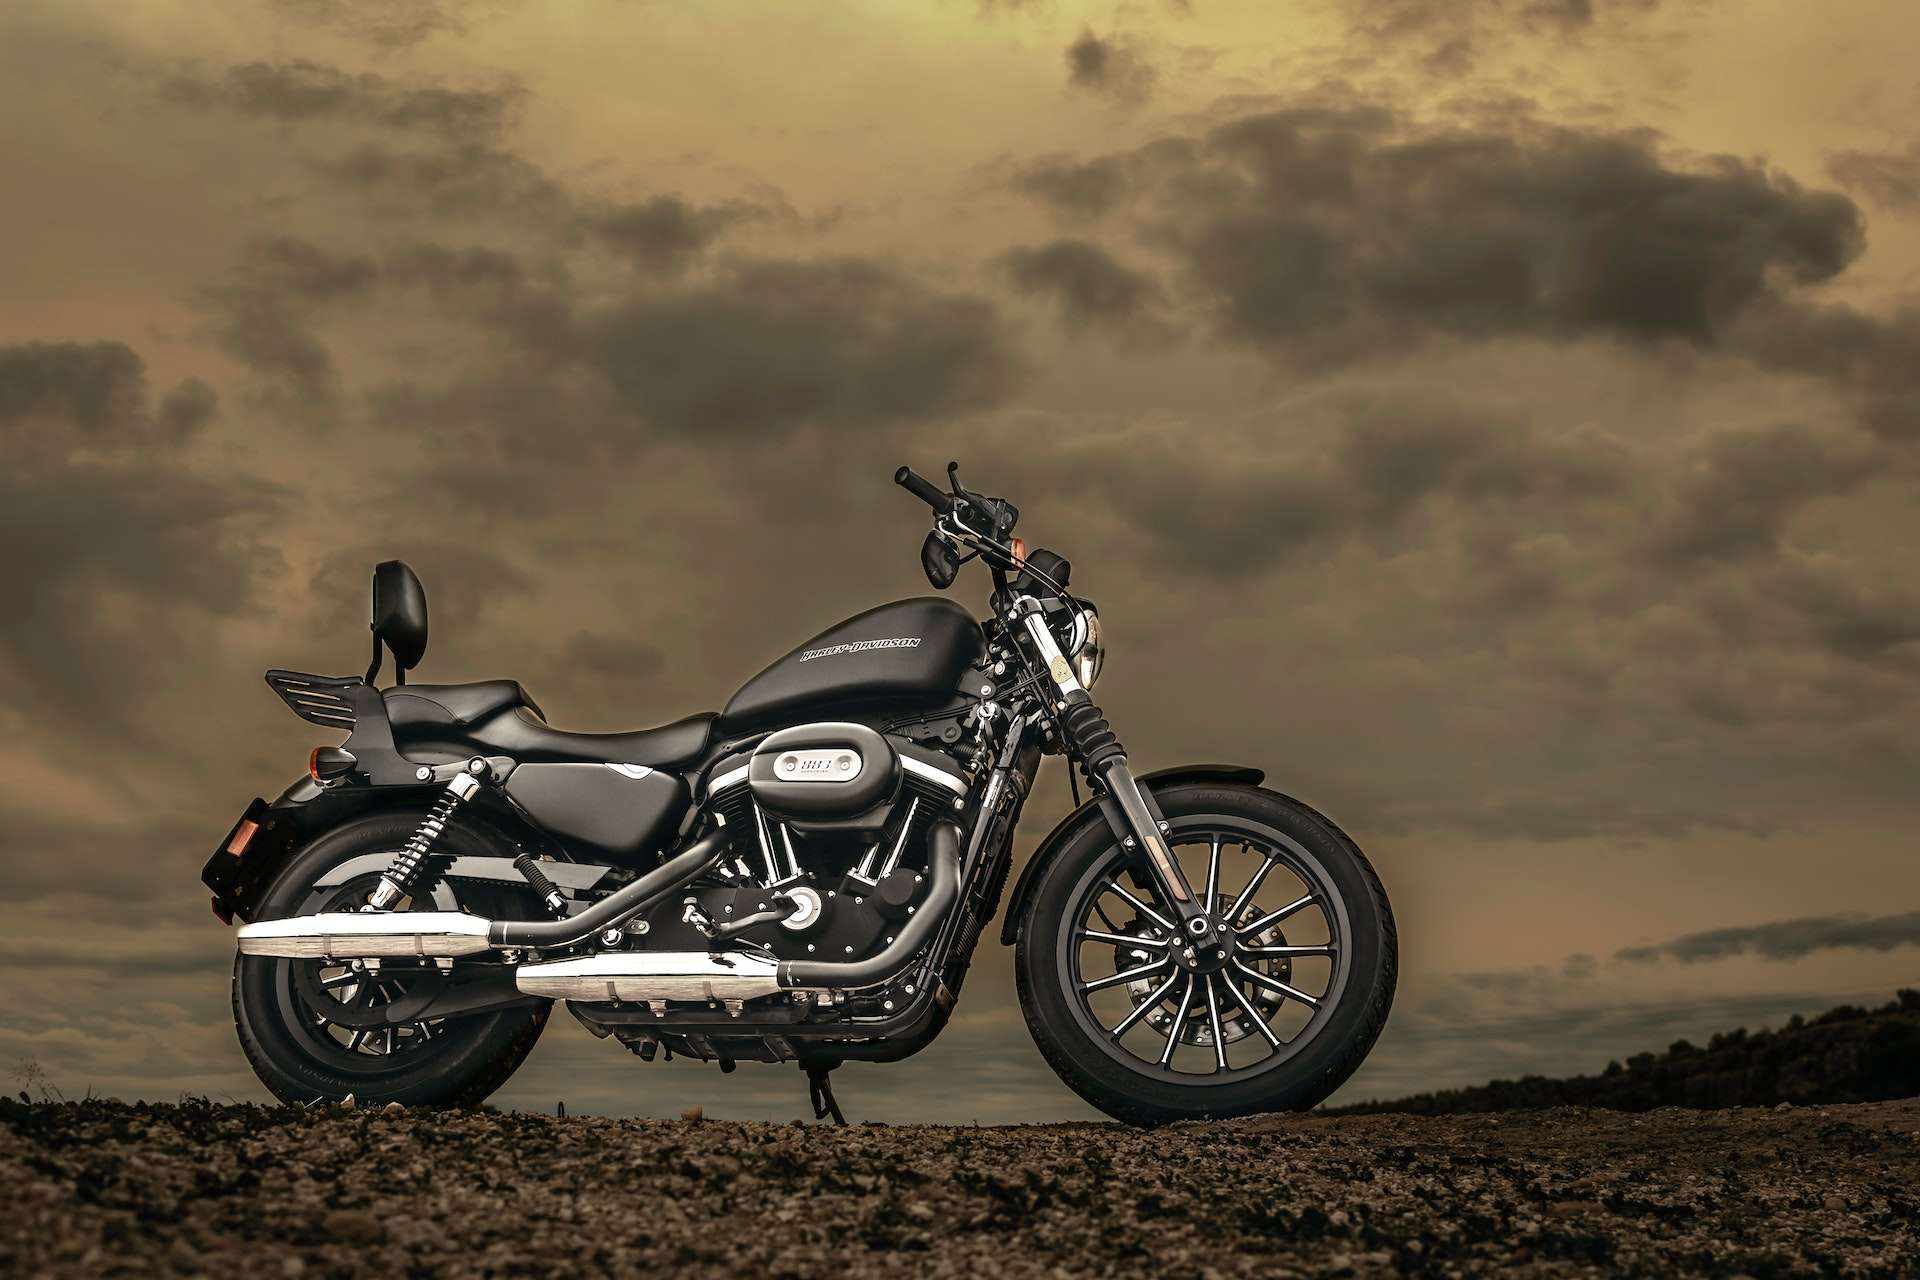 Harley-Davidson motorcycle on rocky ground against cloudy sky